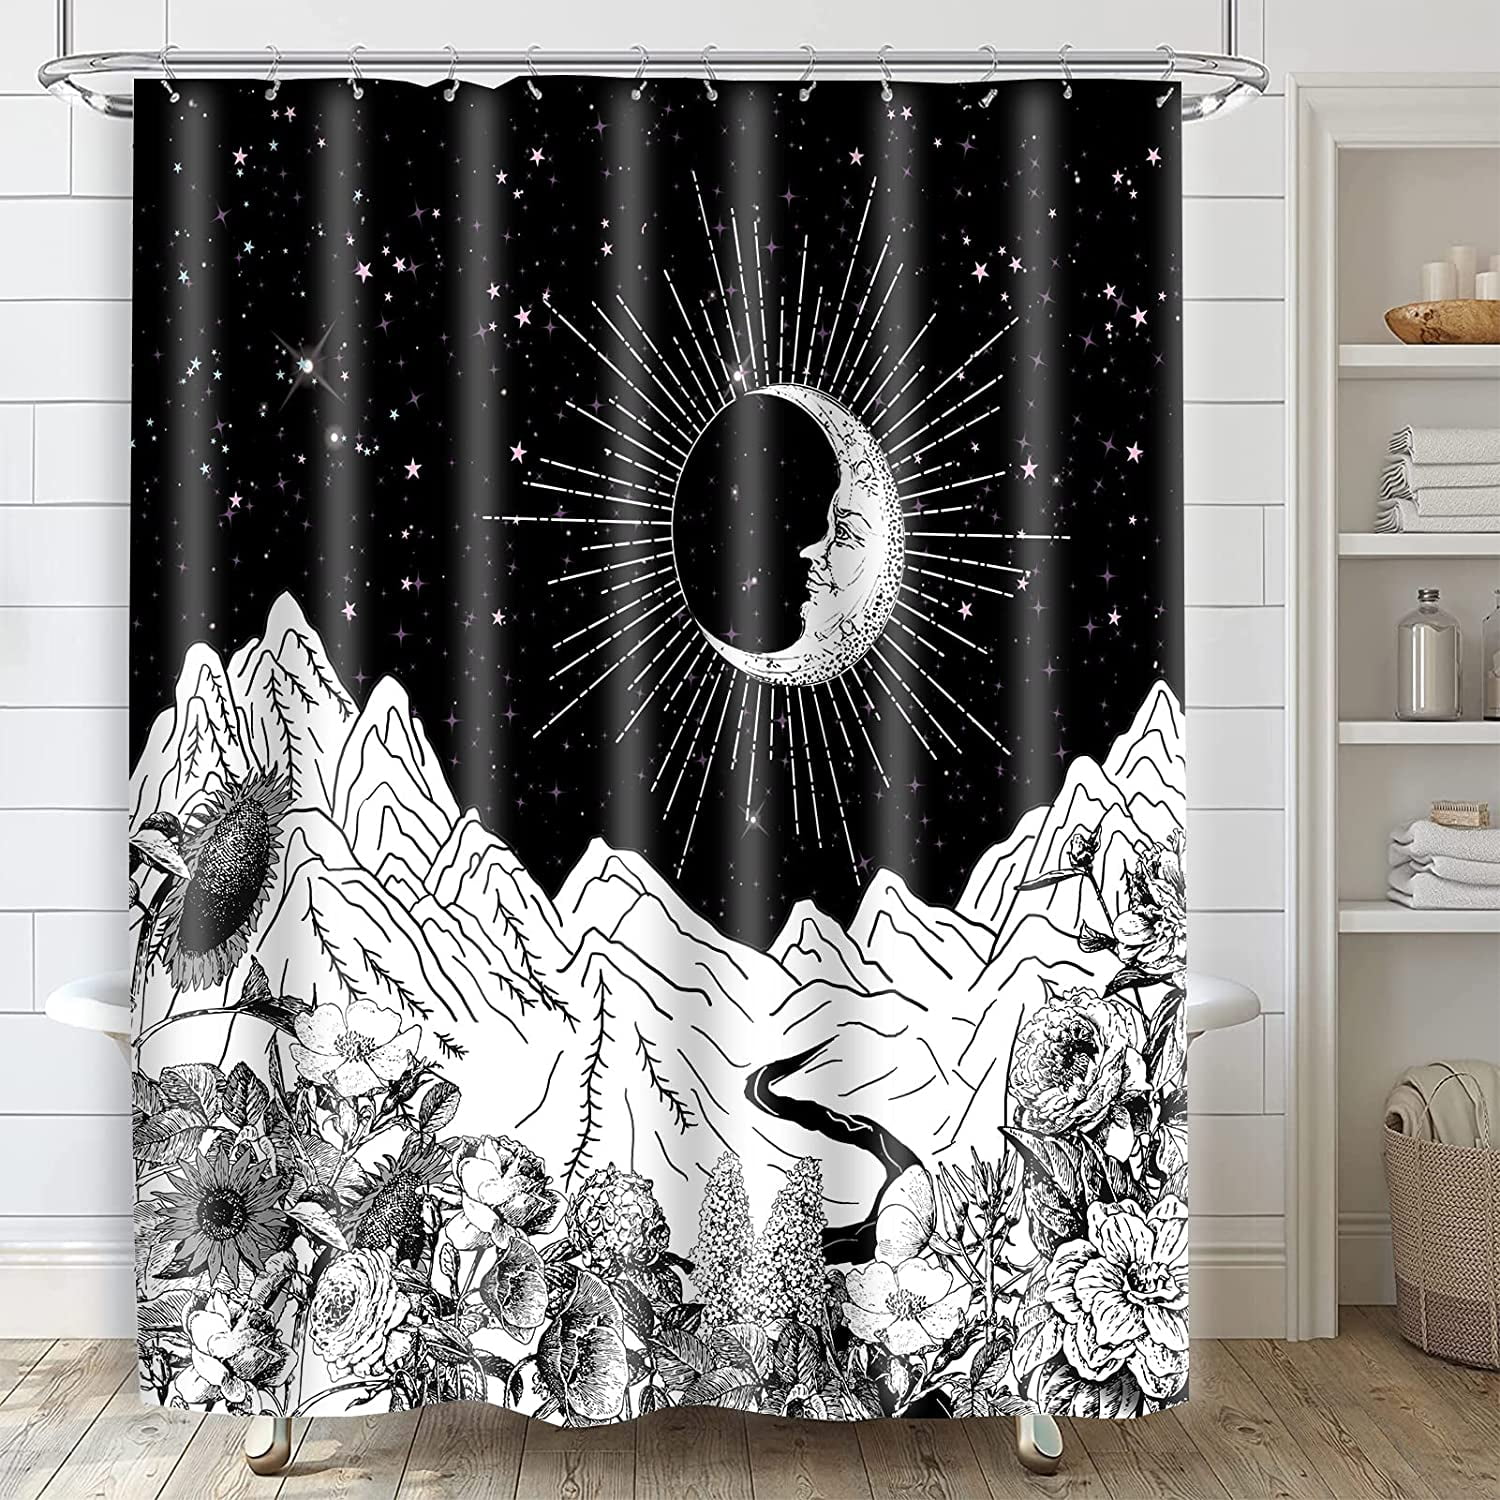 Extra Long Shower Curtain 72x96 Inch Length Bohemian Mountains Moon Set For Bathroom Water Resistant Polyester Fabric Machine Washable Com